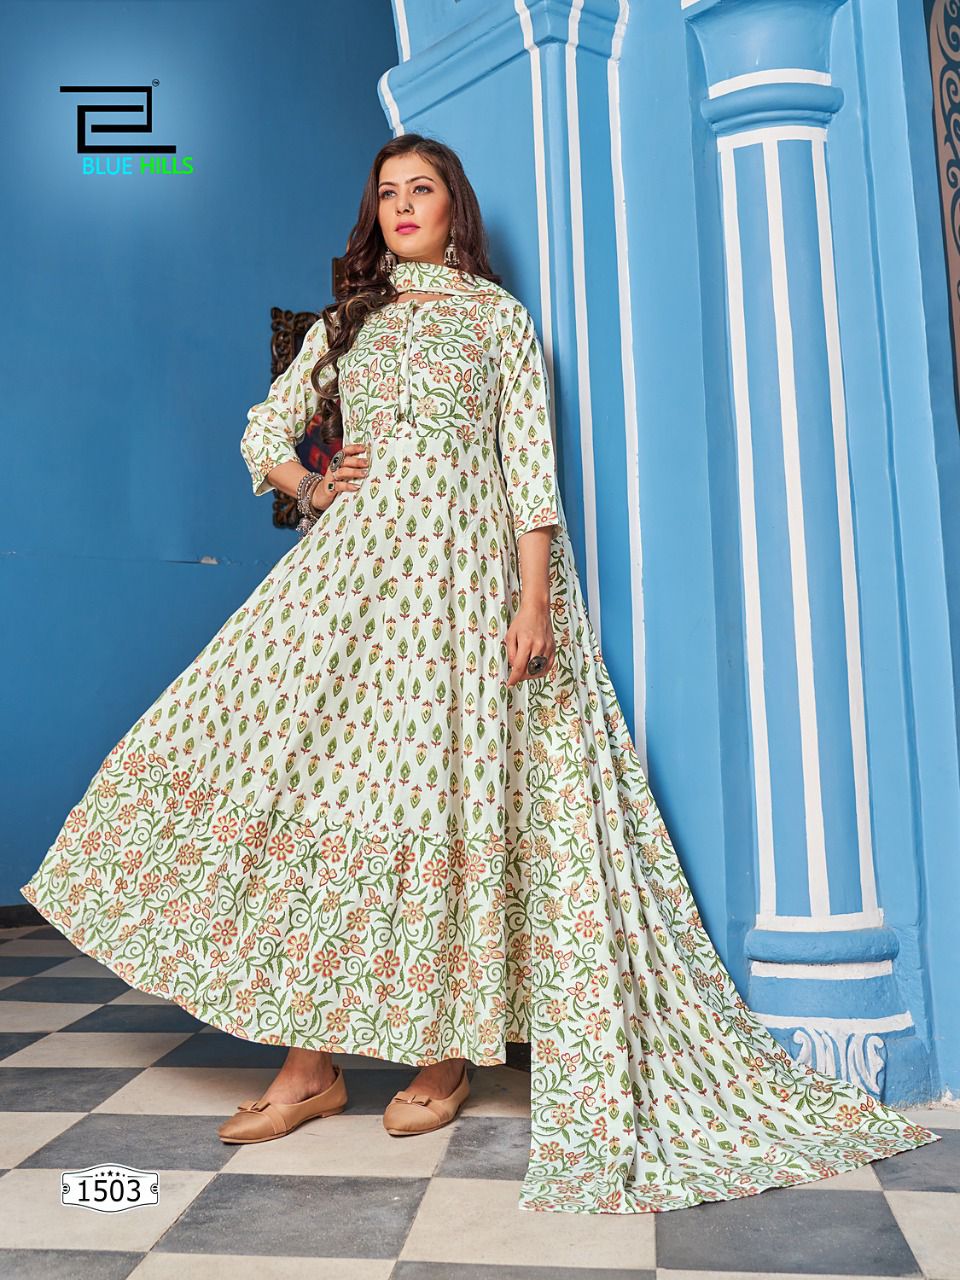 Blue Hills Manika Mage Hithe Vol 15 collection 2